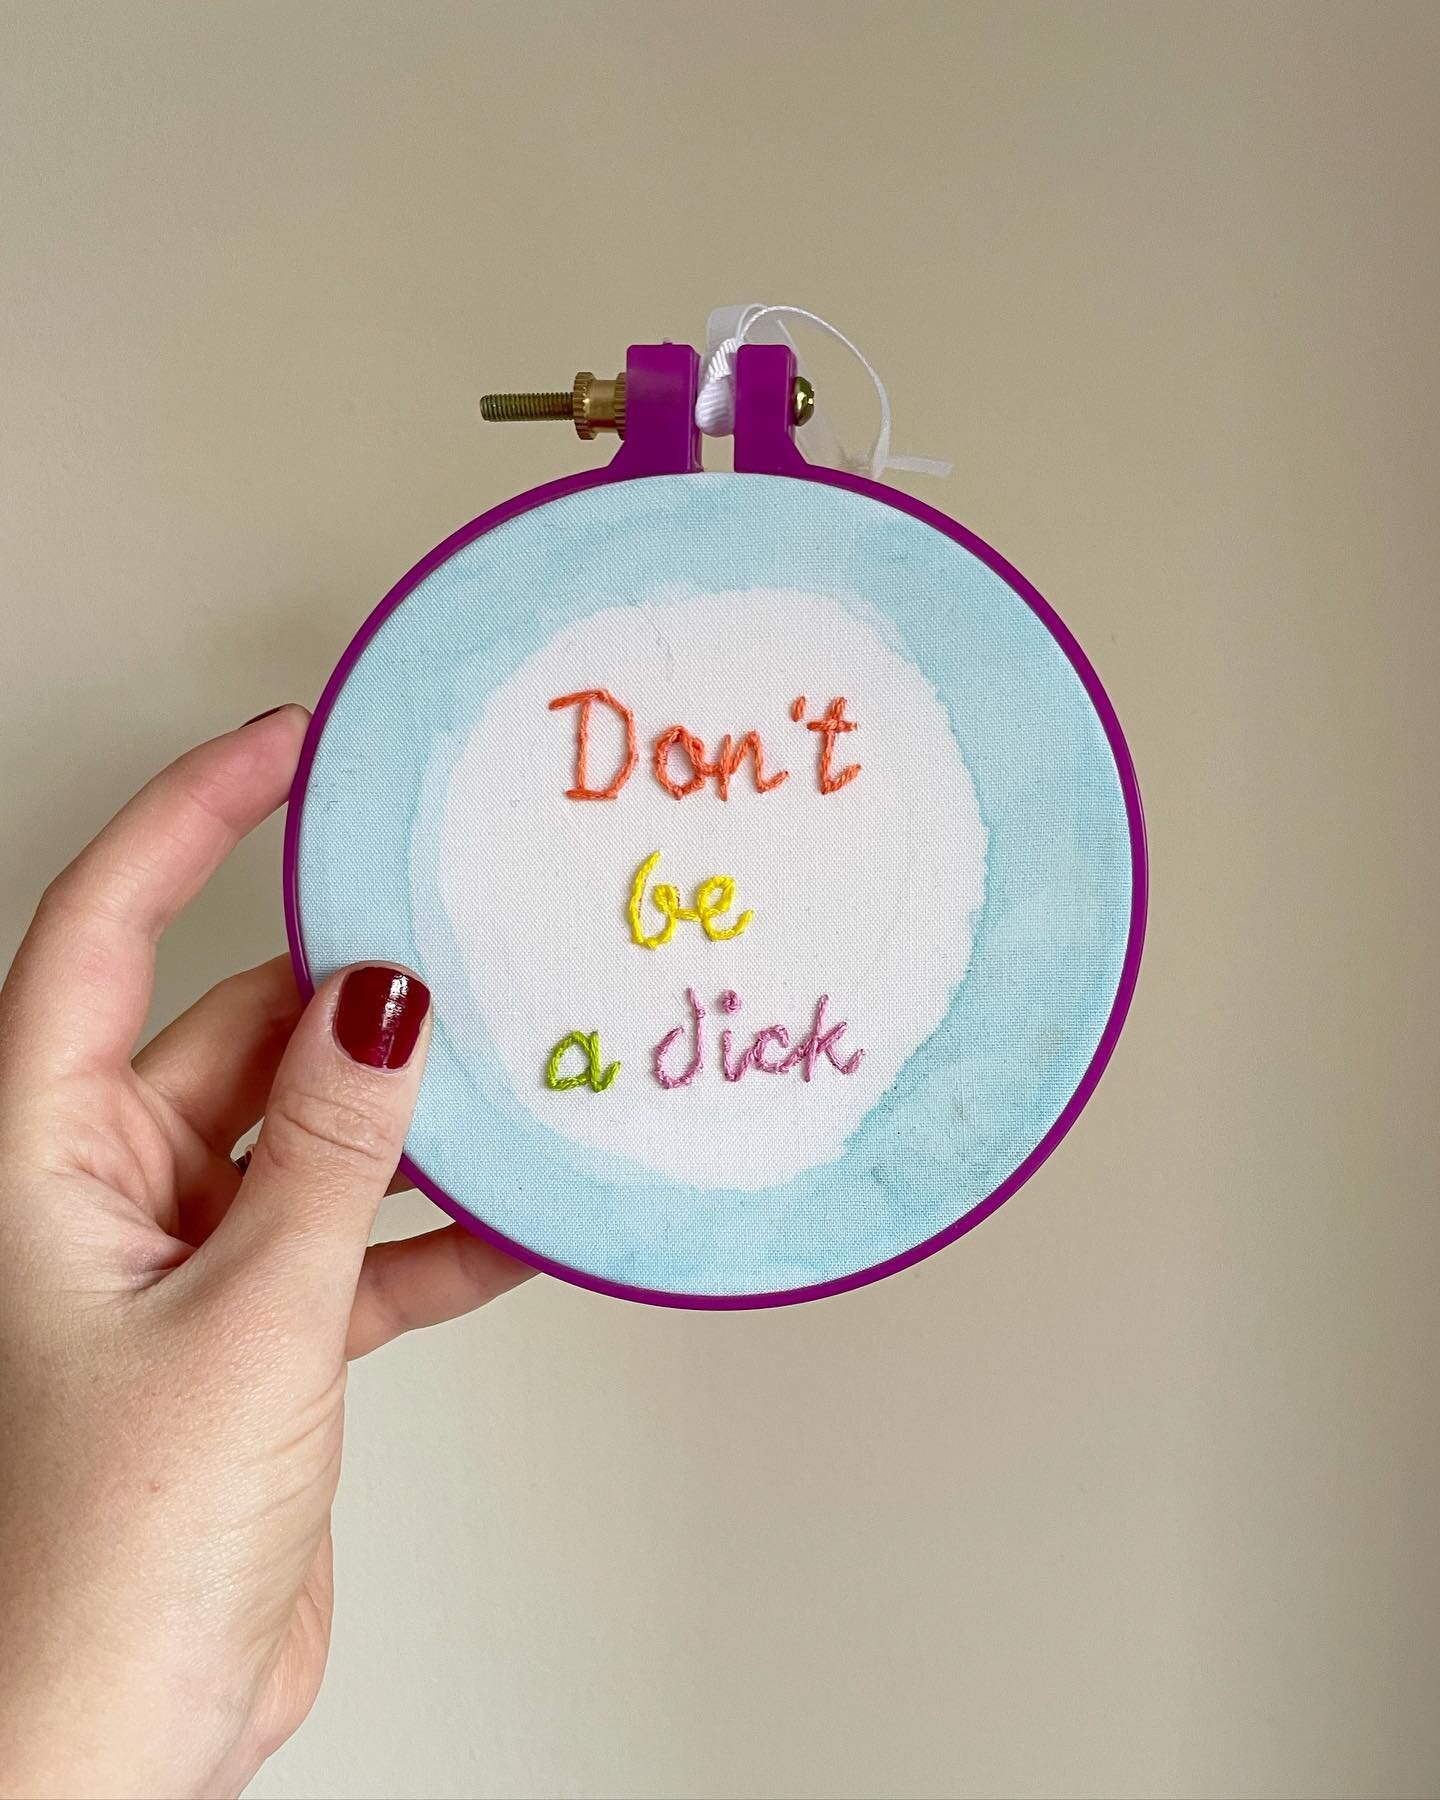 It&rsquo;s a great day to have a great day and not be a 🍆(to anyone and especially to yourself)

Thank you for this fabulous piece @twonunsandavampire which I got this weekend 🤩

#dontbeadick #needlepoint #smallbusiness #shopsmall #createandcultiva